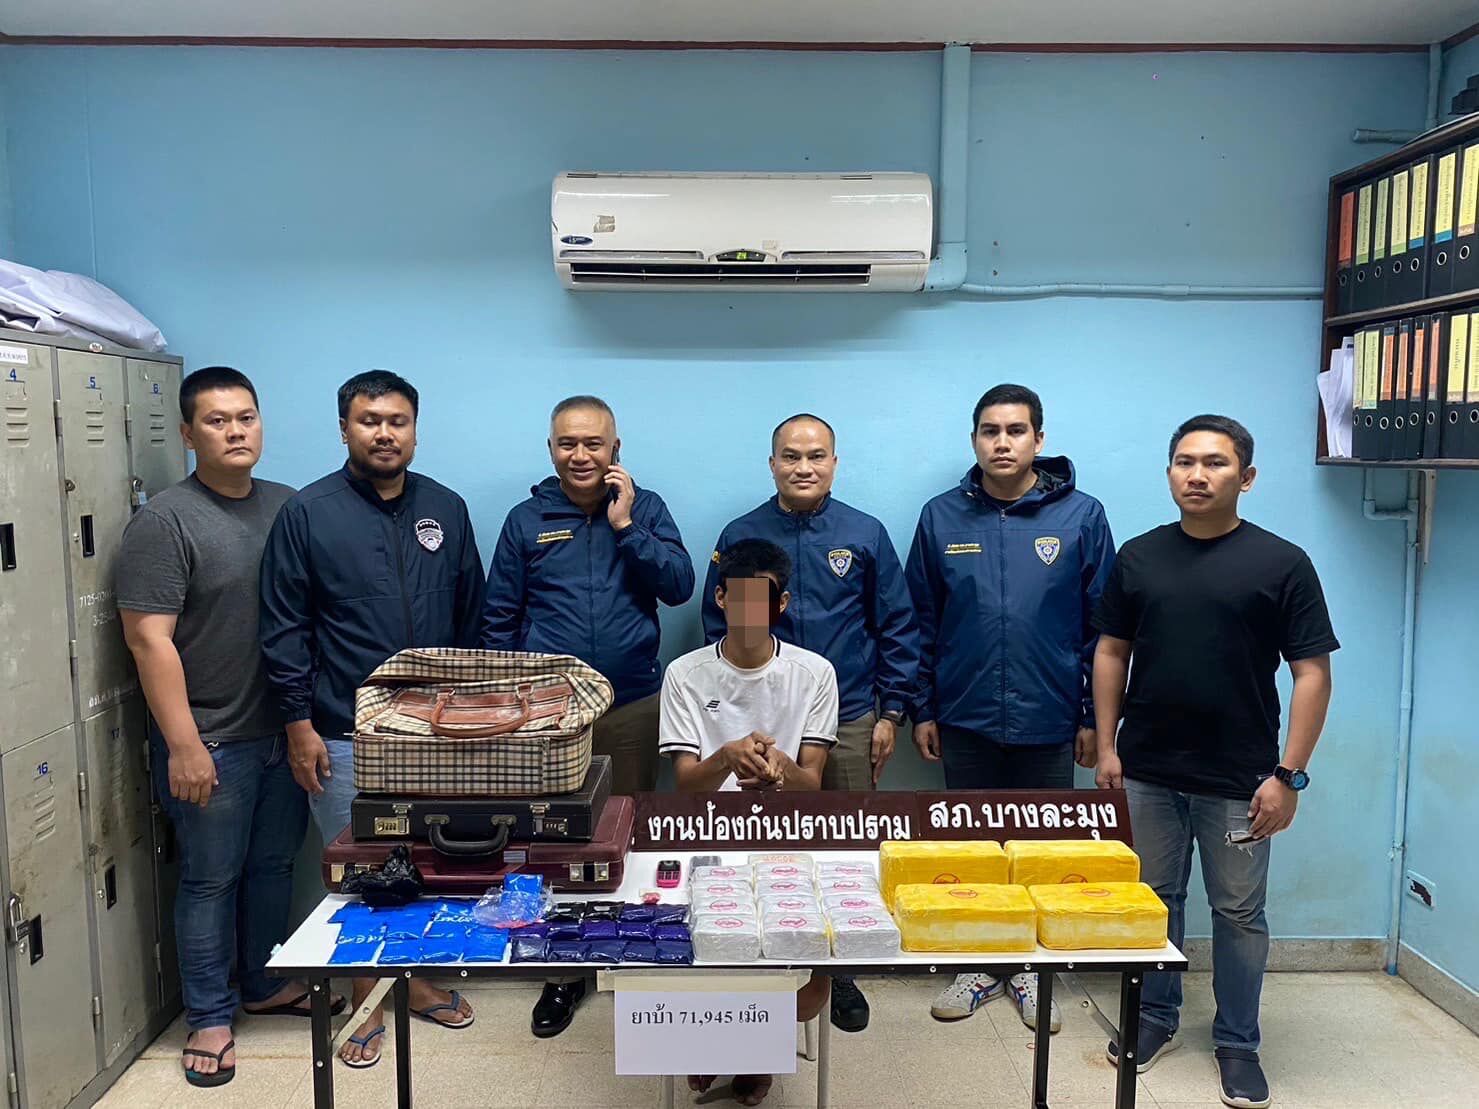 Rayong man arrested with 70,000 meth pills despite daughter’s pleas